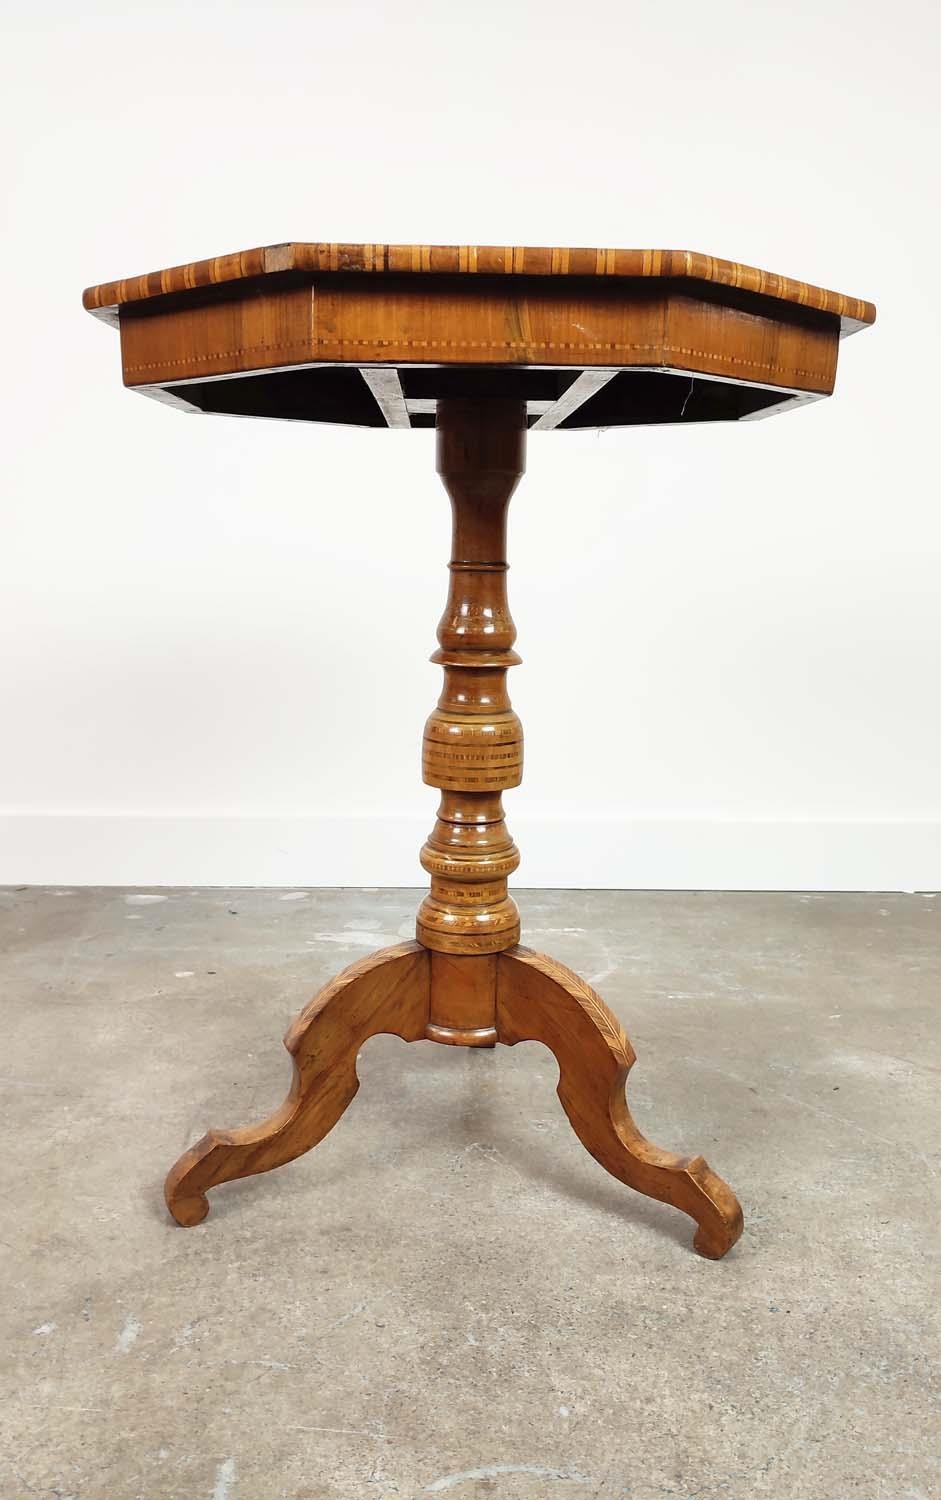 OCCASIONAL TABLE, mid 19th century Italian walnut, marquetry and parquetry with octagonal top on - Image 3 of 9